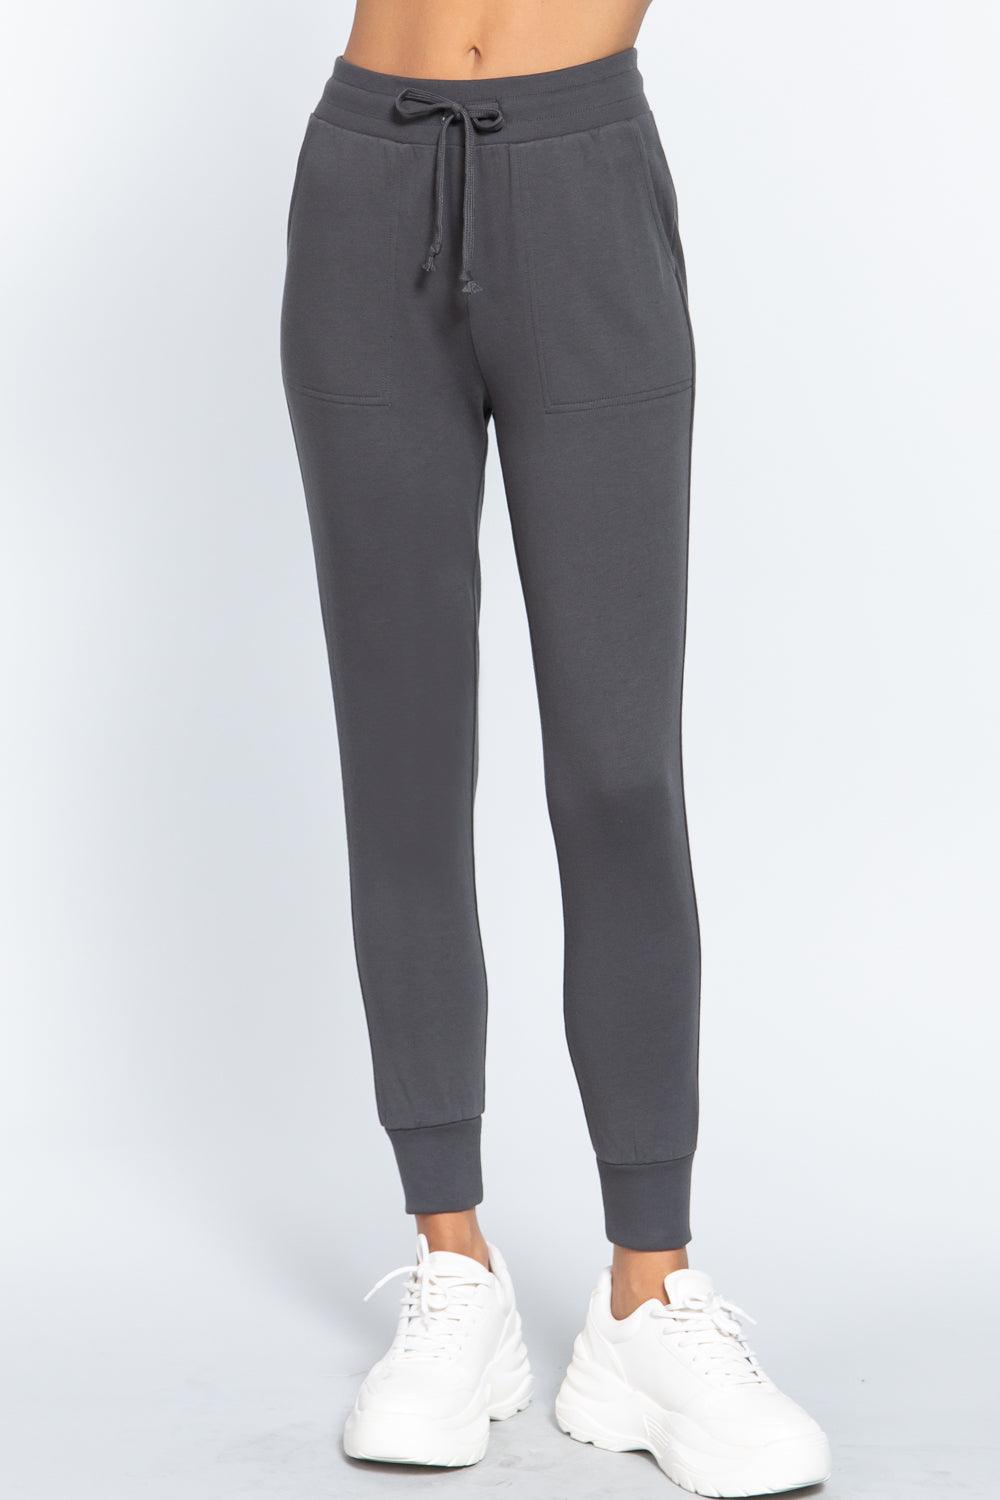 Waist Band Long Sweatpants With Pockets - Kreative Passions